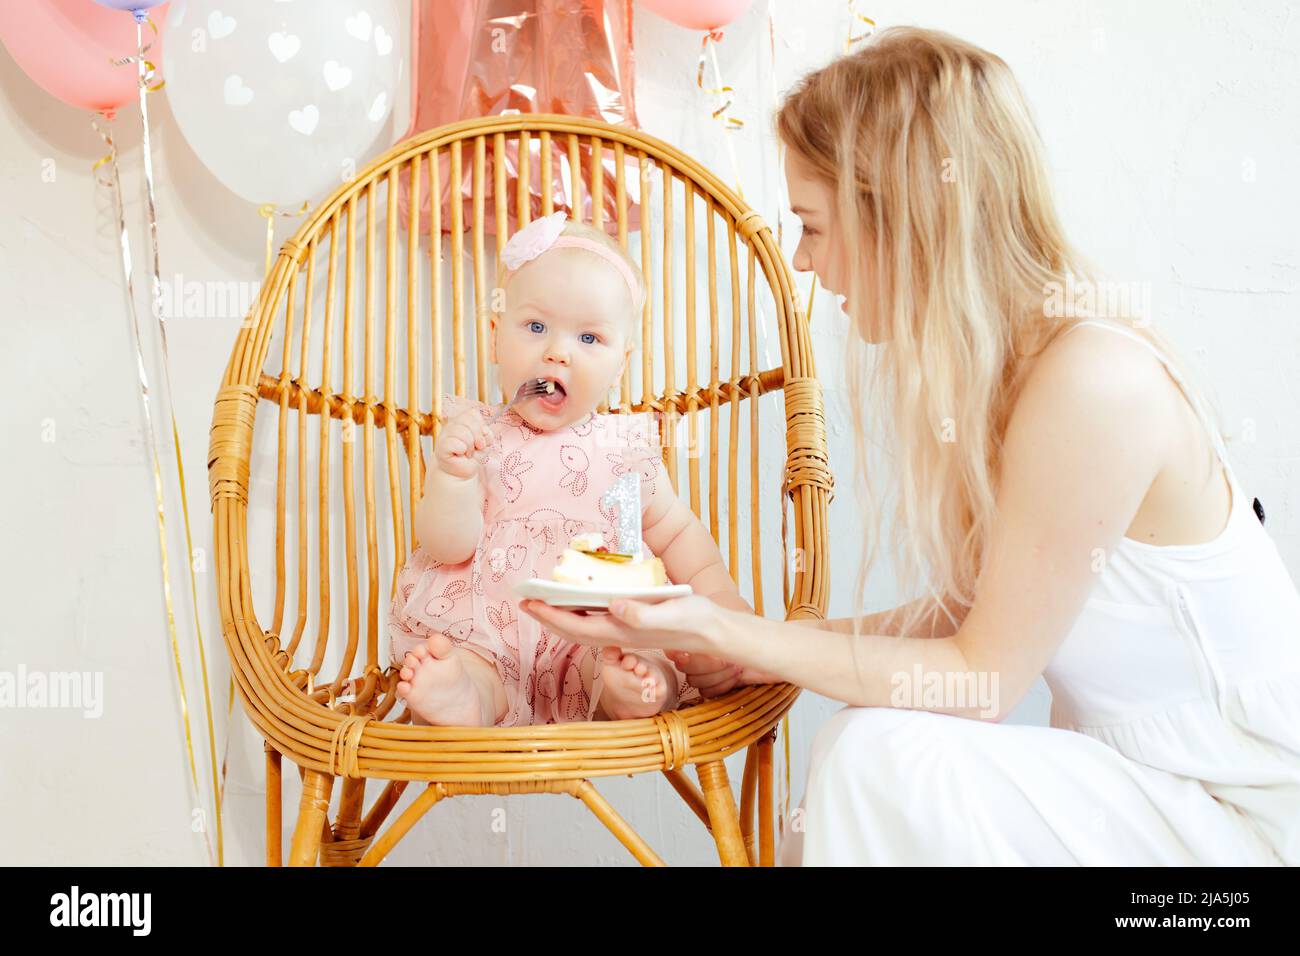 Portrait closeup of young mother and baby girl sitting and eating cake in holiday dress on white background. First birthday party, pink decor and Stock Photo